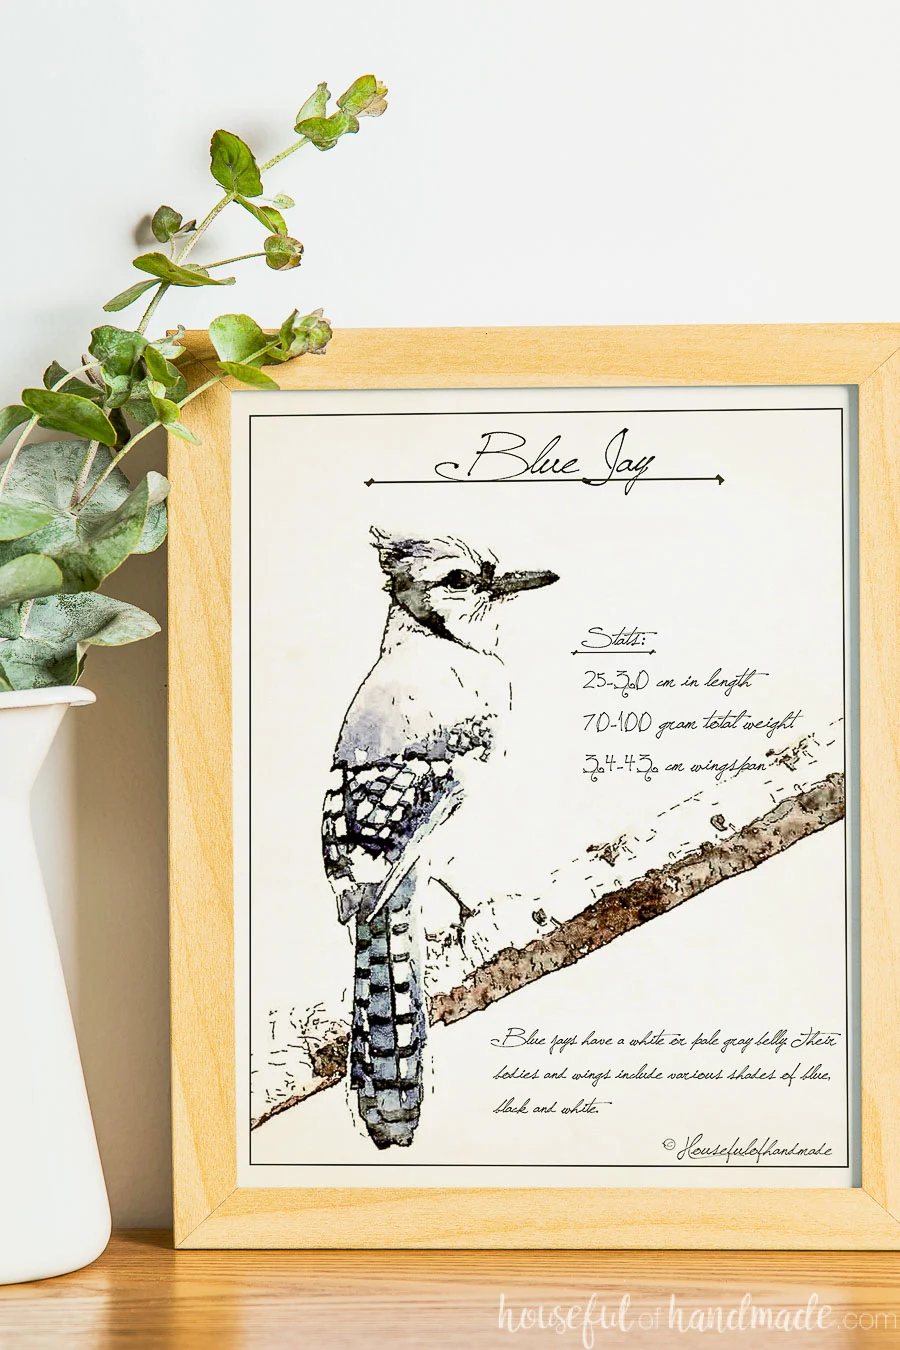 Sketched art of a blue jay with stats about the species in a frame next to a vase.